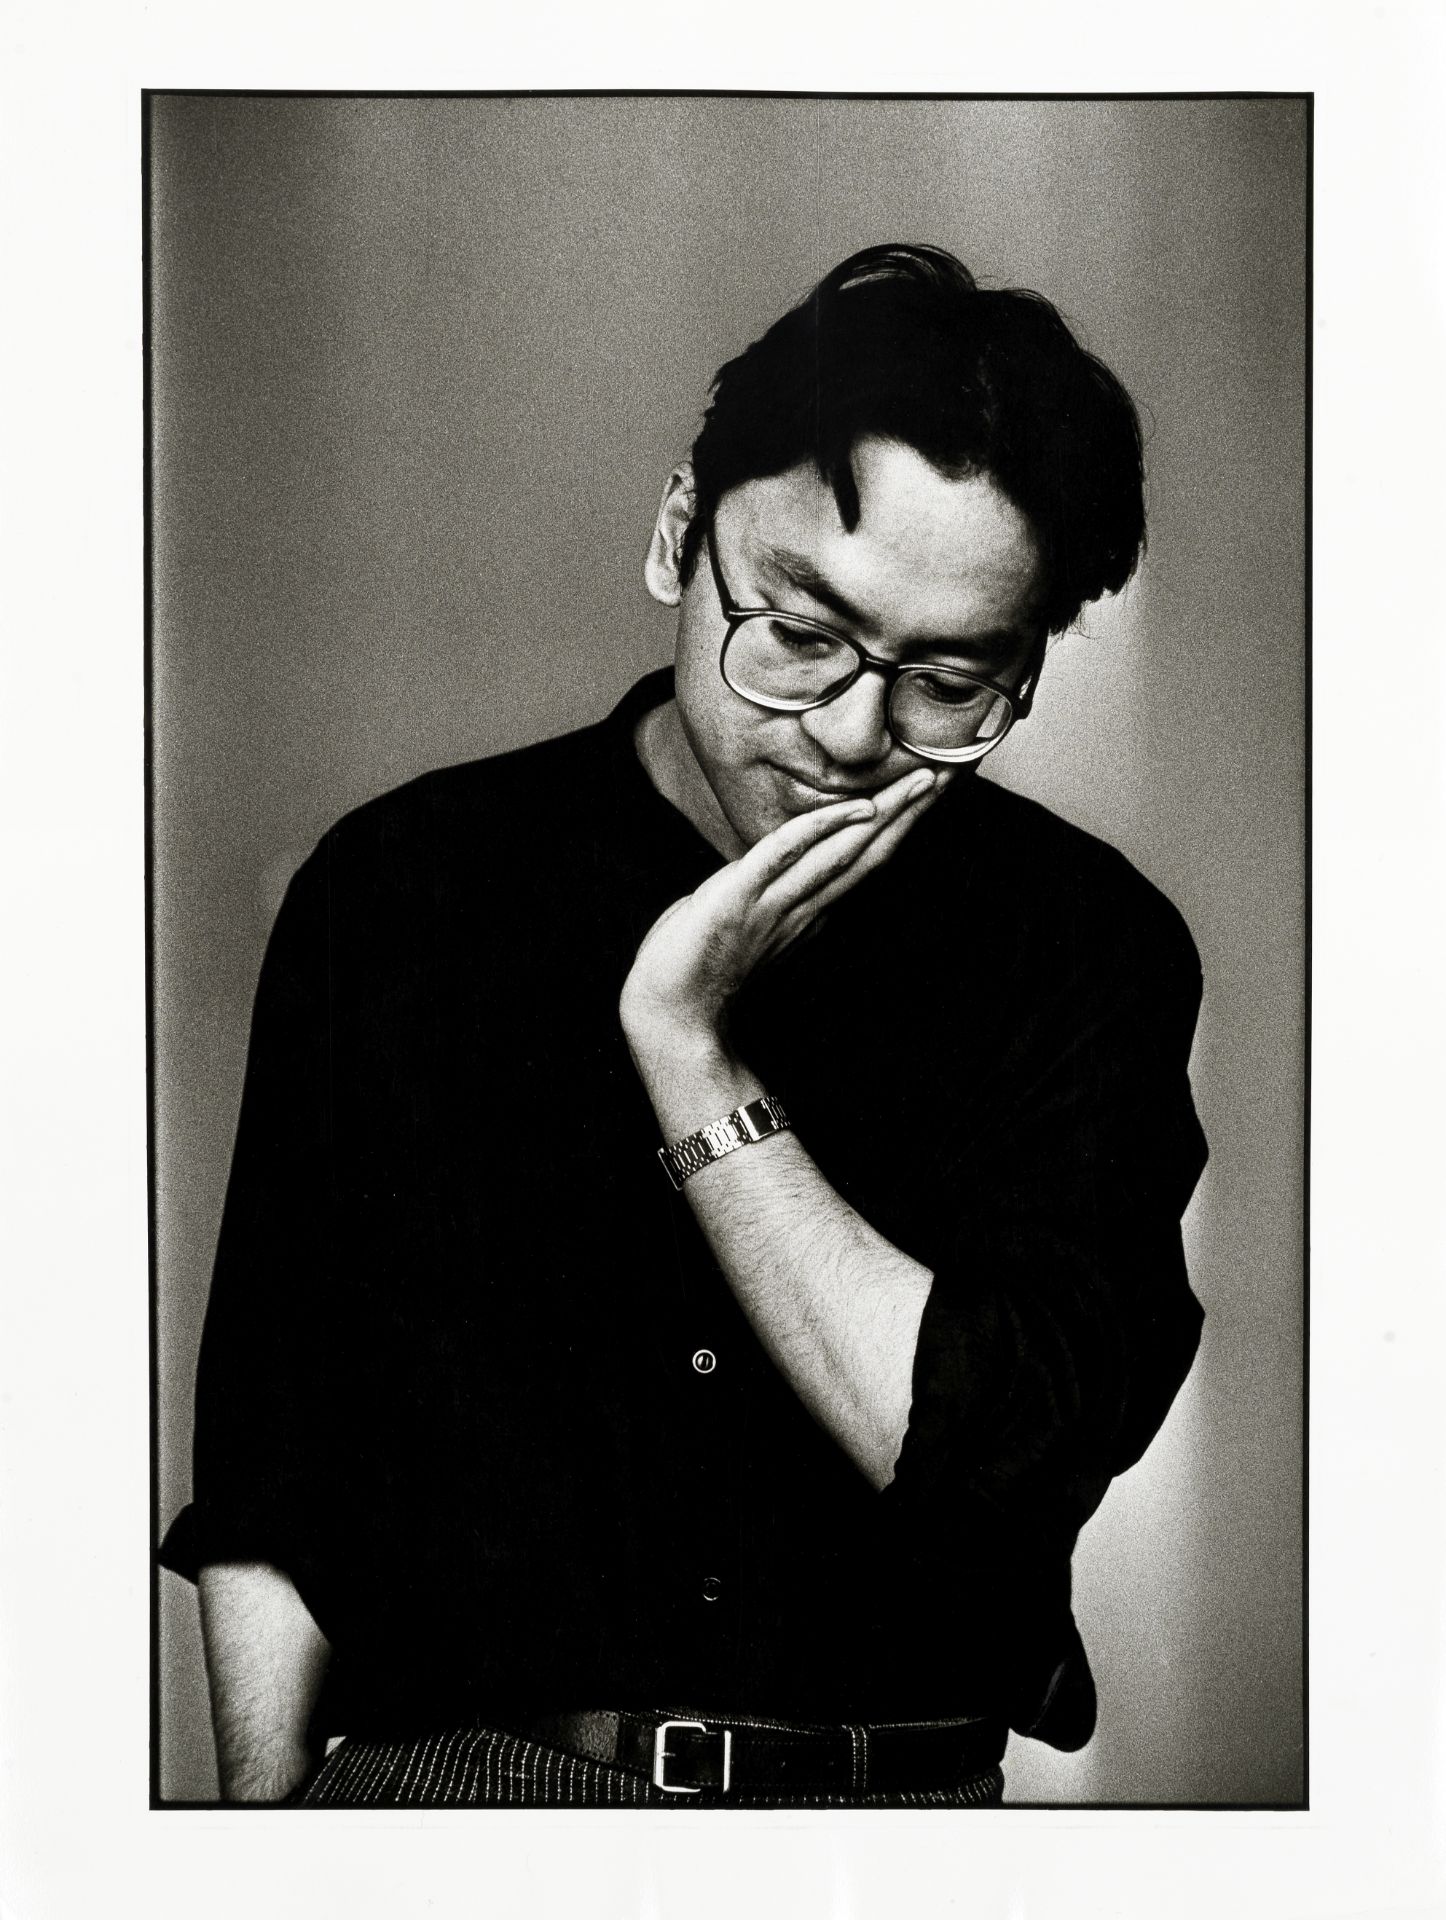 SOAMES (SALLY) 'The writer Kazuo Ishiguro at his home in London', 1989